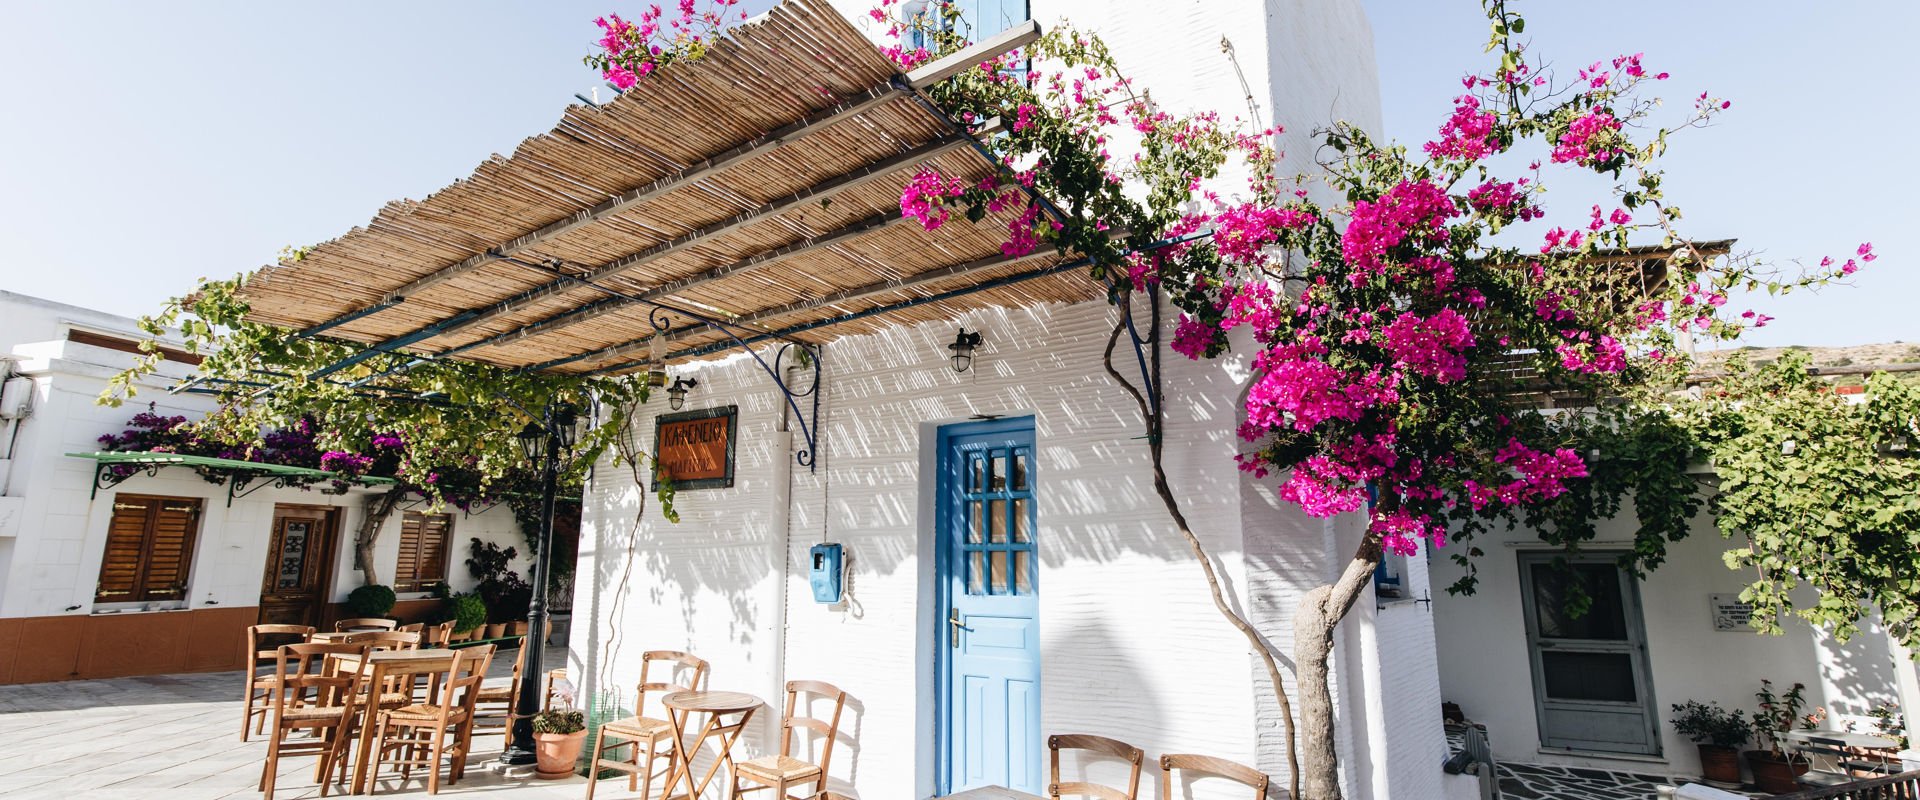 The fantastic vibe of Paros blending style and tradition